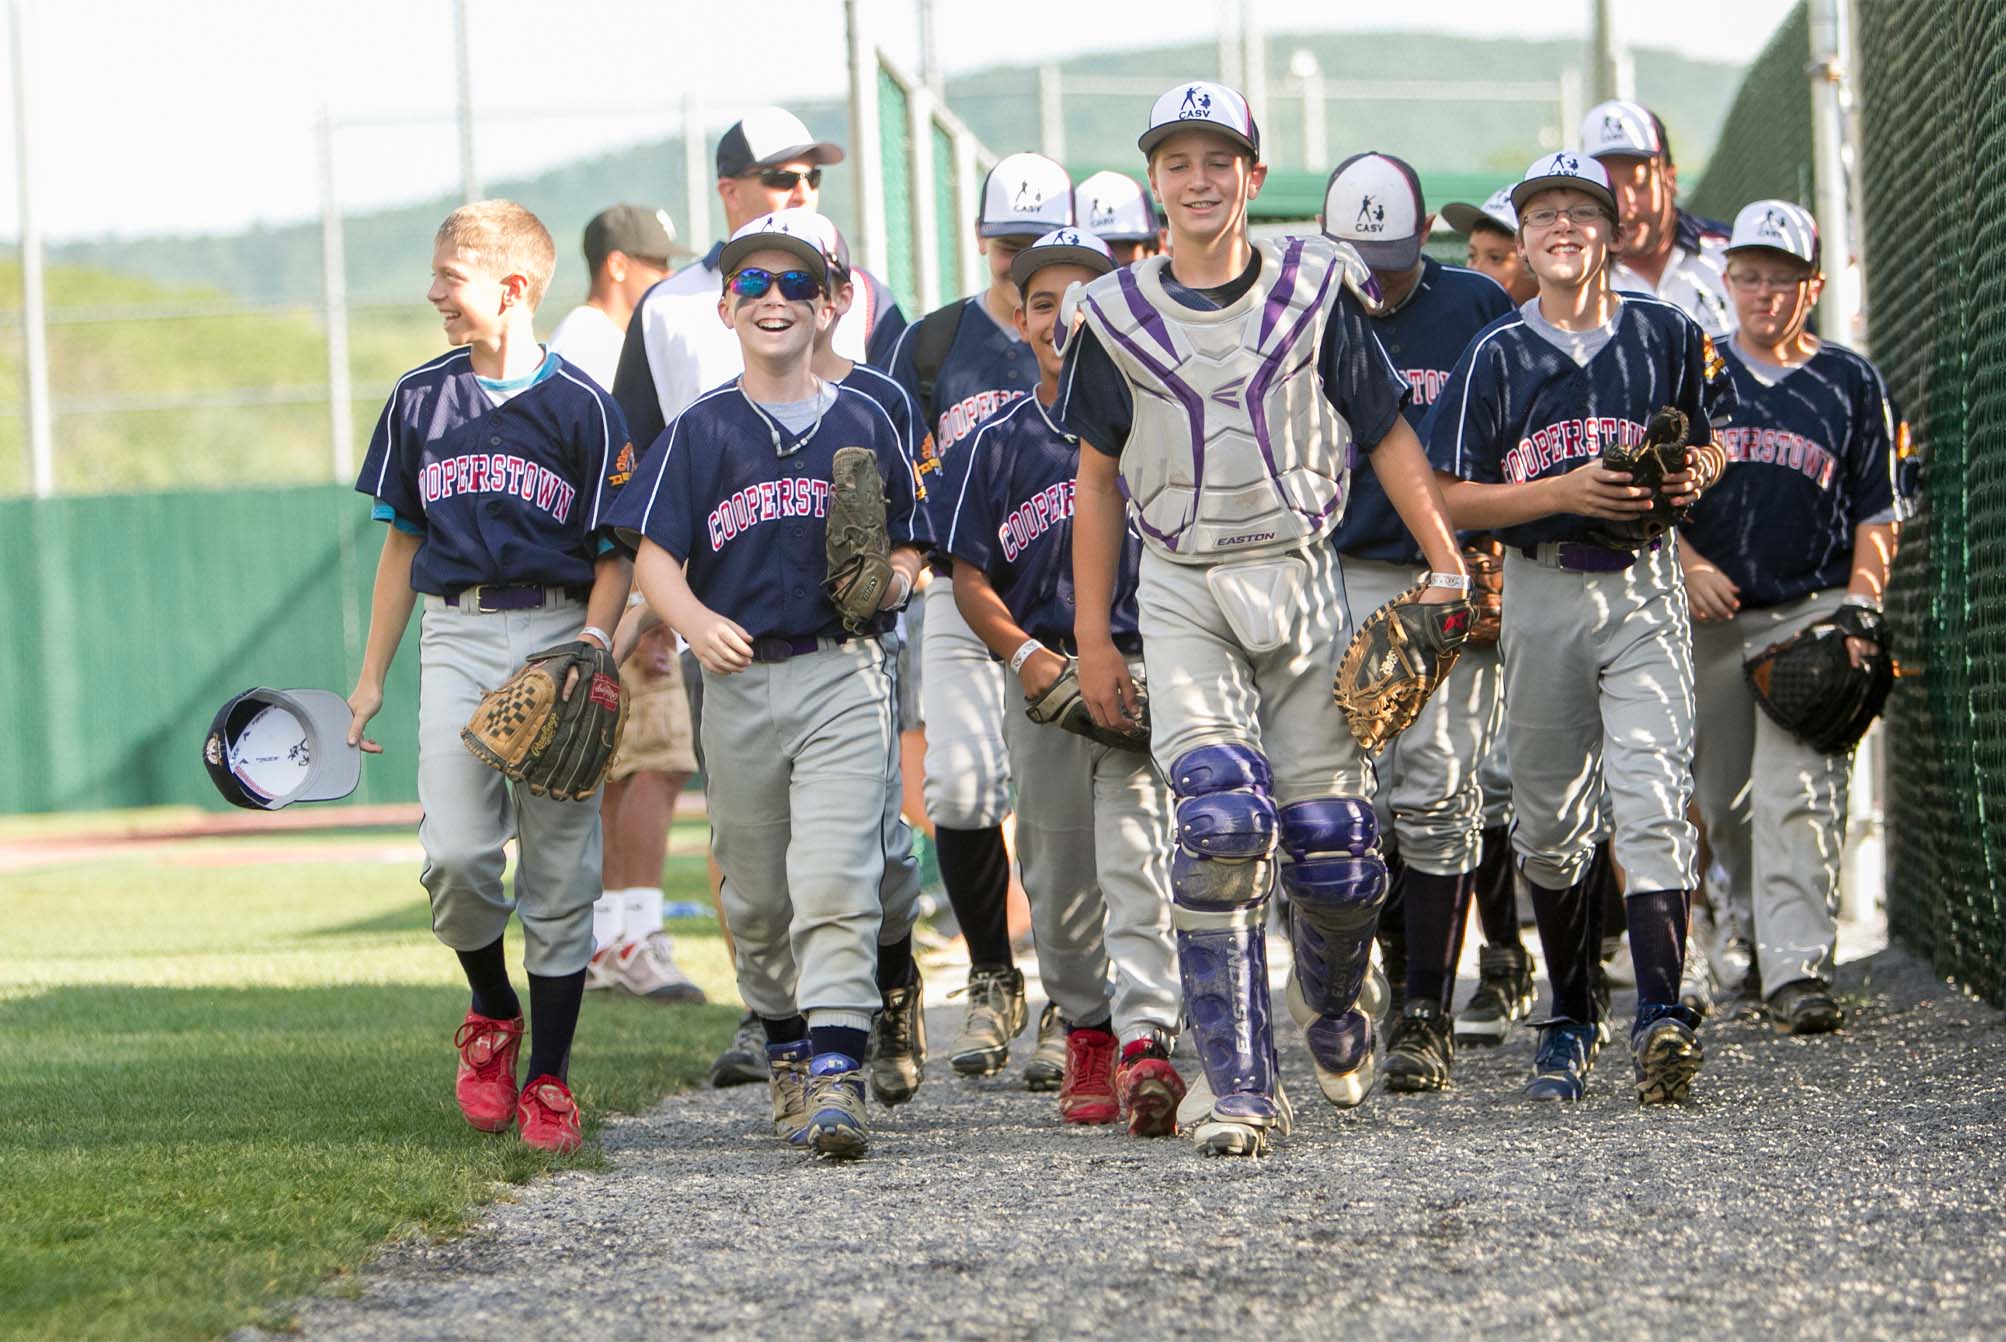 children from the Cooperstown baseball team walking after the game